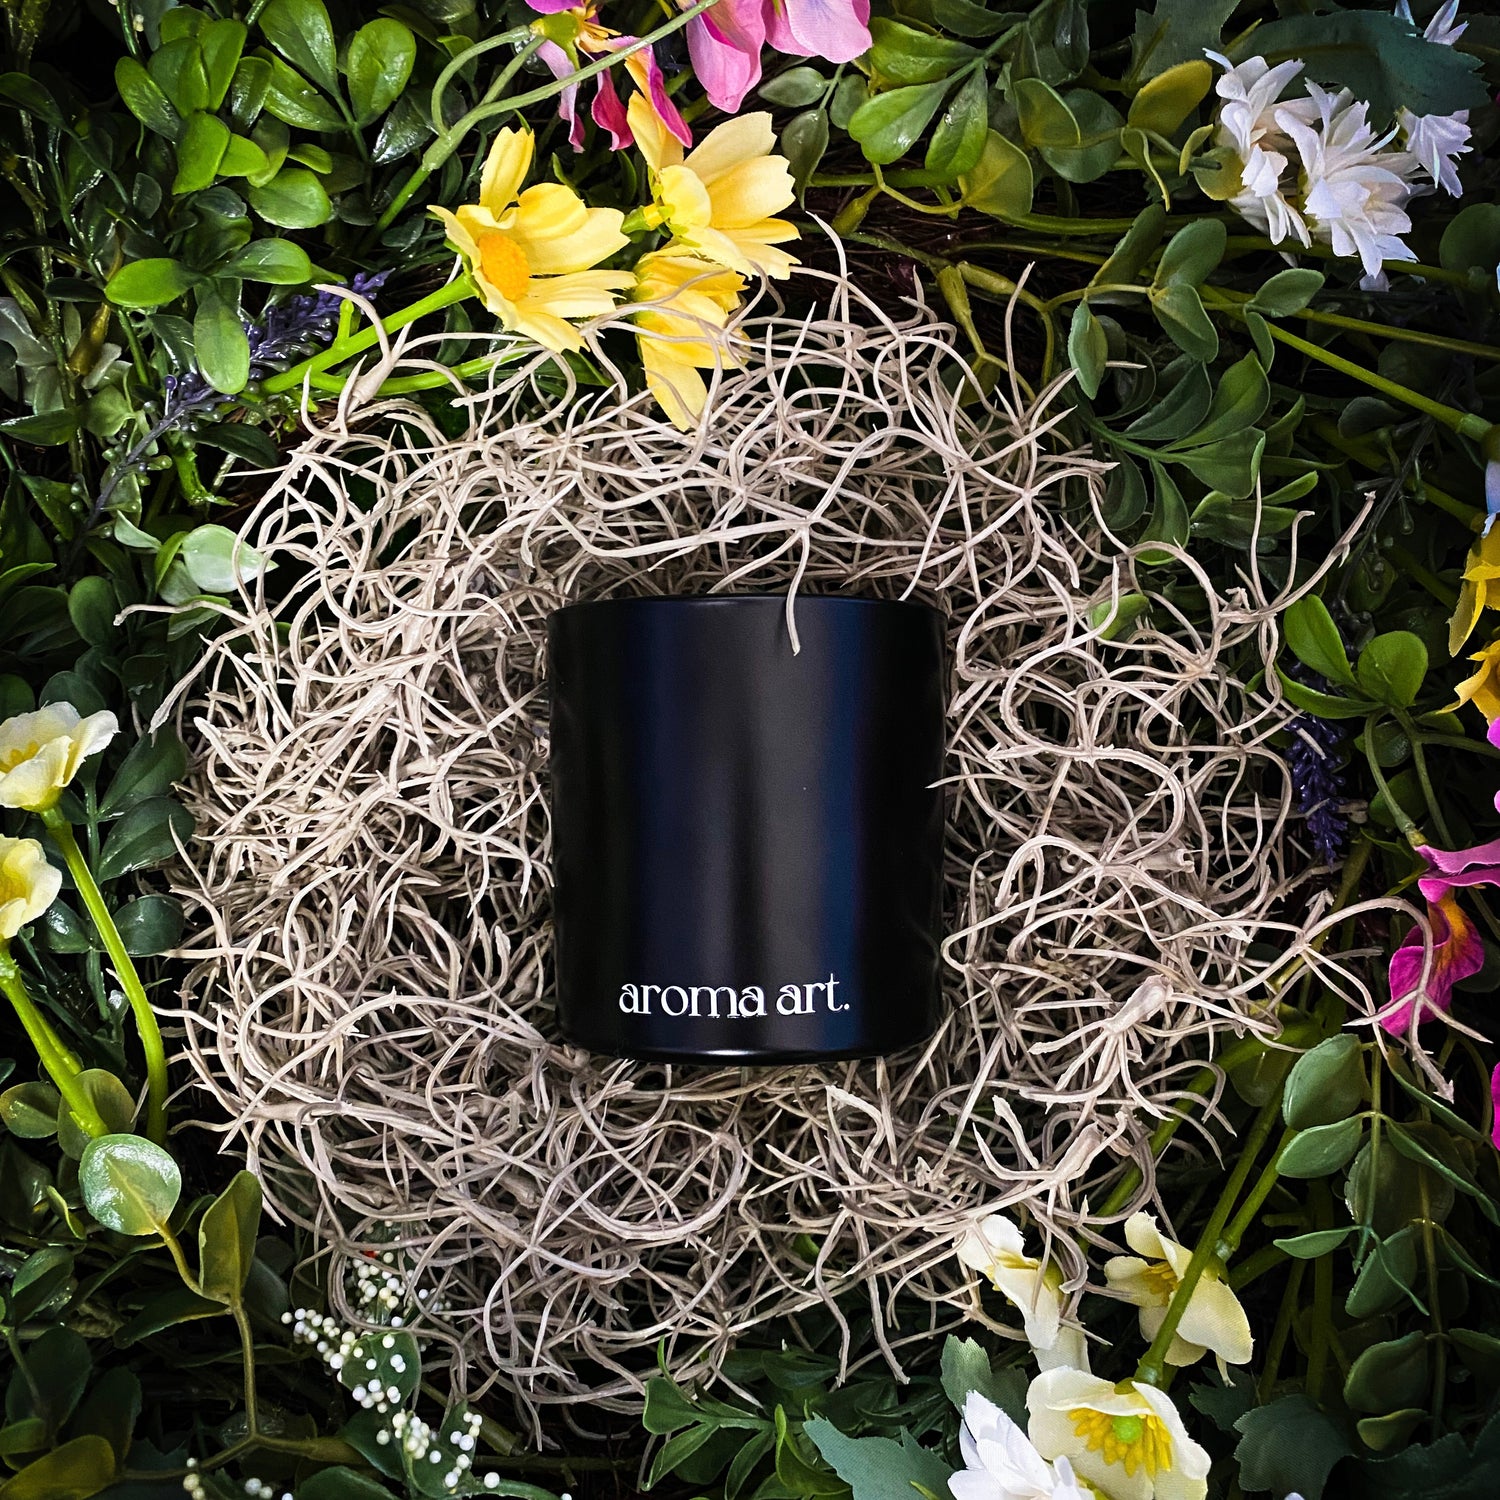 7 oz Meadow crackling wooden wick candle with notes of grass, basil, and black tea. Shown in its elegant black vessel, surrounded by nest of wildflowers. An earthy, verdant, and floral candle perfect for spring.